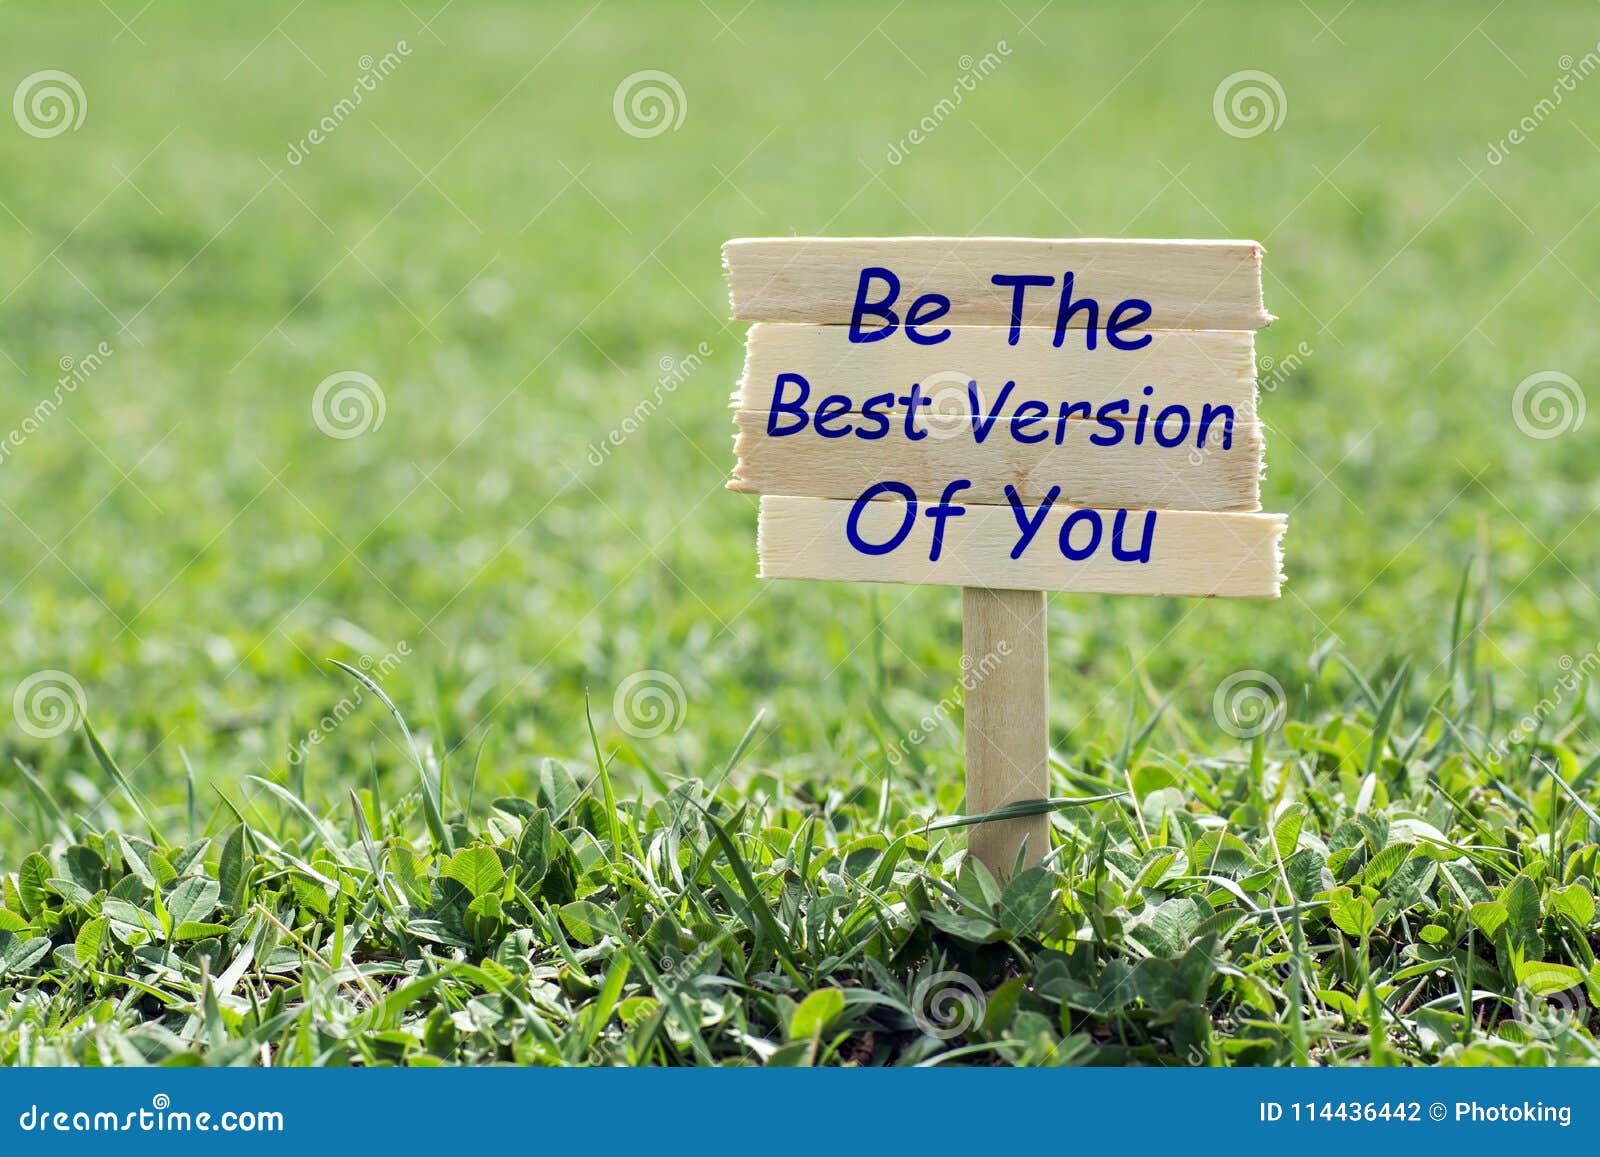 be the best version of you